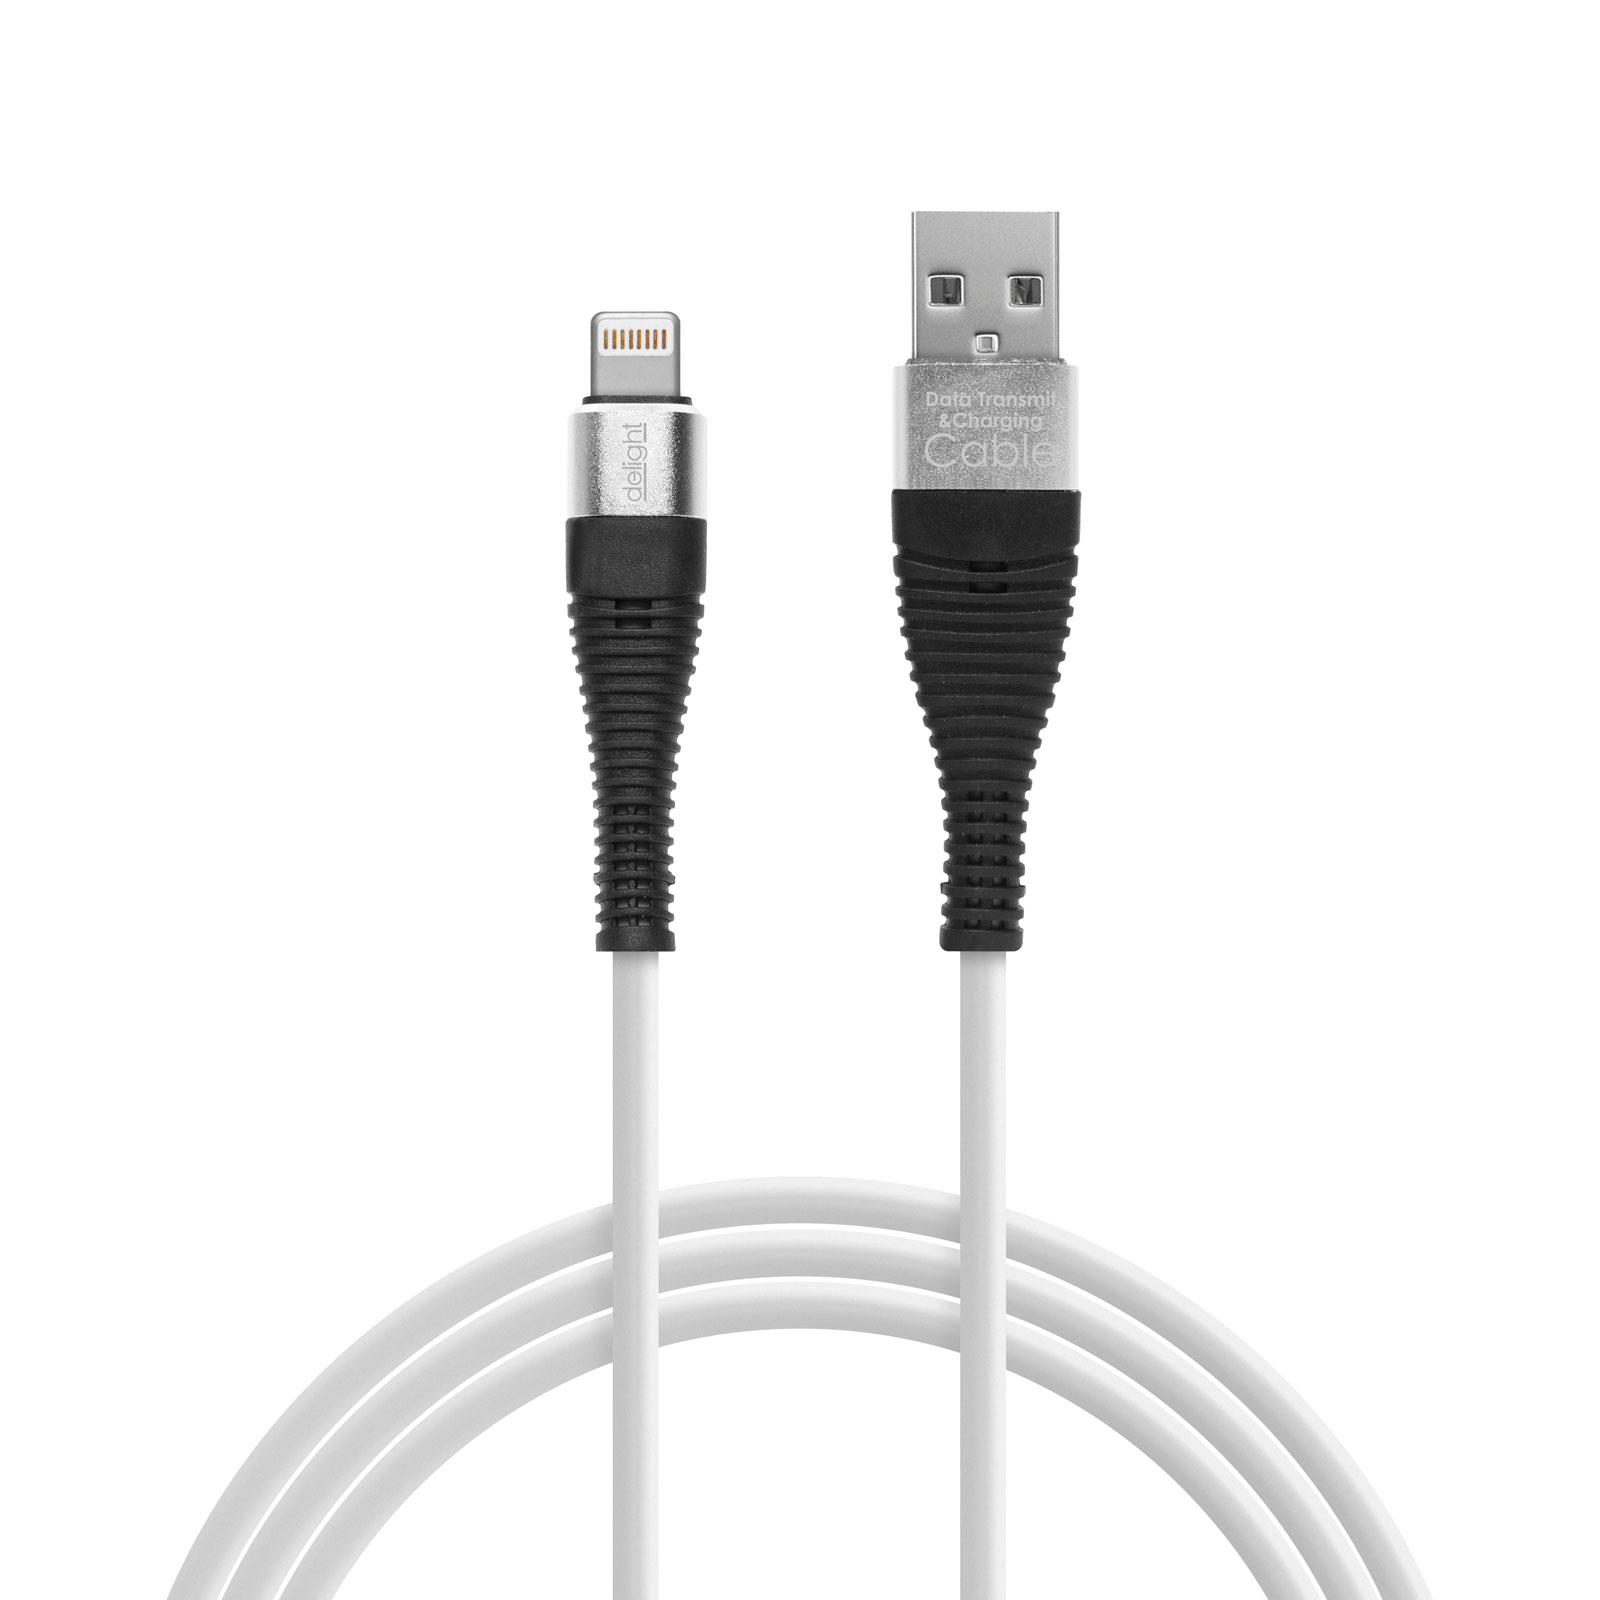 Data cable for iPhone - "lightning" thumb